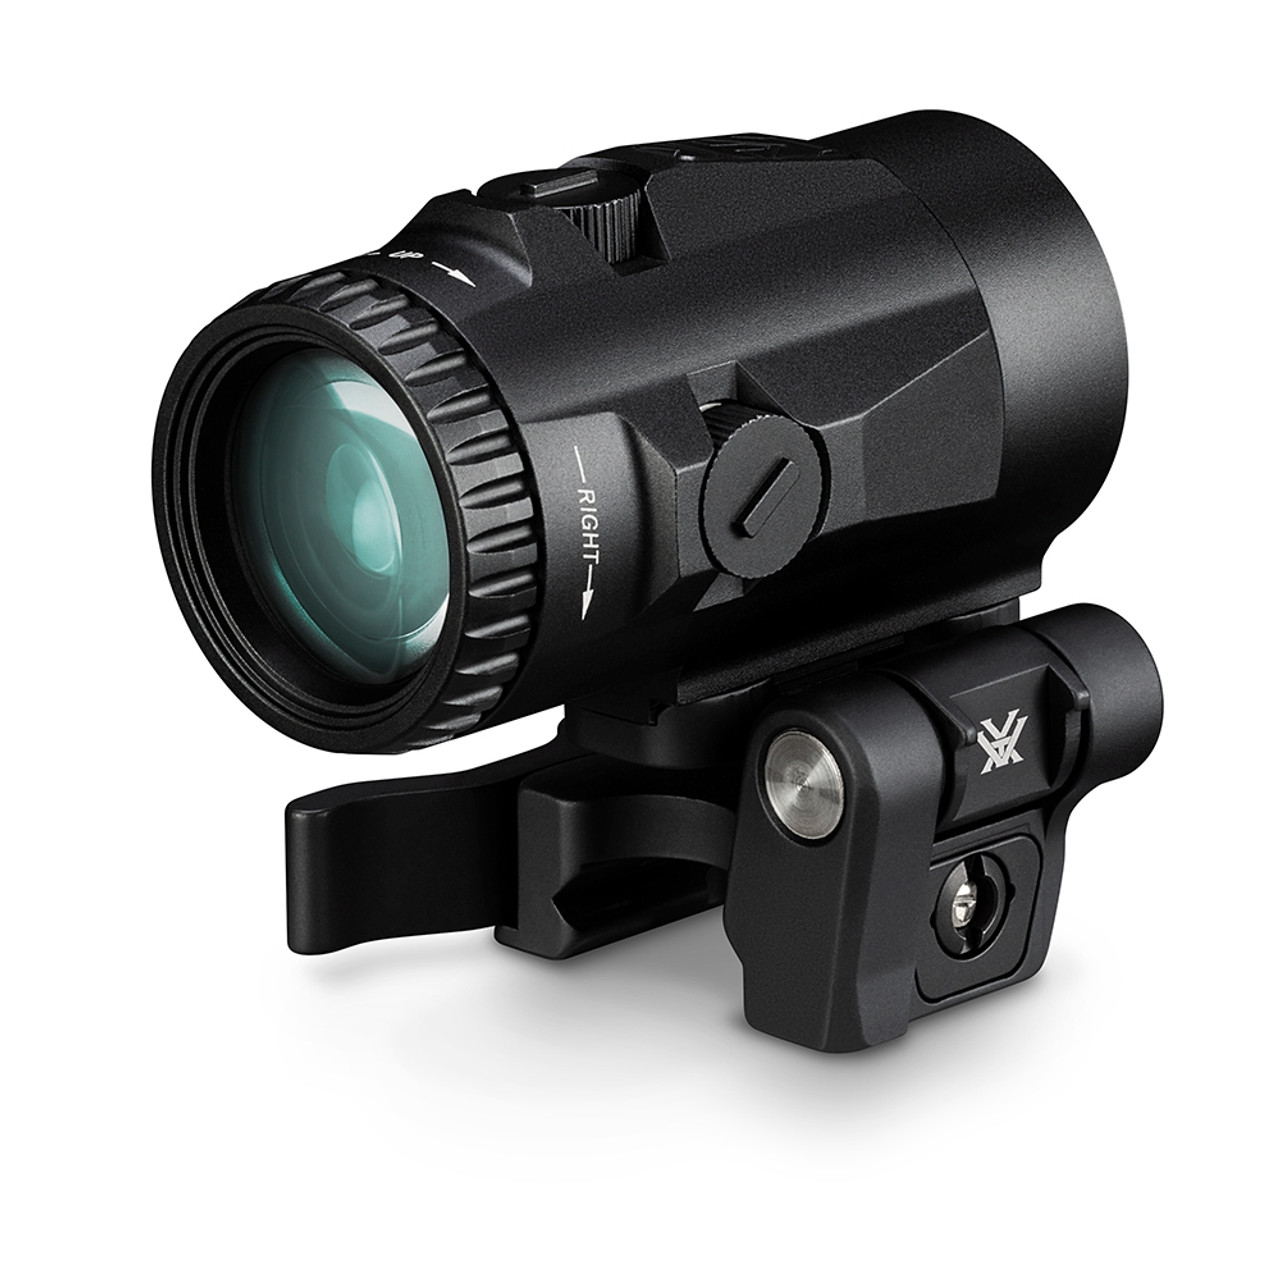 Next level 3x magnification versatility when you need it for your red dot or holographic sight in an ultra compact, lightweight, and optically crisp package. Integrated quick-release mount allows fast attach/detach from your rail and a patented camlock design quickly engages/disengages magnifier with direct pressure. Adjustable flip mount allows for right or left-handed use.

The Micro3X magnifier will work with any of our red dots but may magnify any existing parallax. The Micro3X will not work with prism scopes.

SKU	VT-V3XM
Magnification	3x
Objective Lens Diameter	22 mm
Eye Relief	2.64 inches
Linear Field of View	38.2 feet @ 100 yds
Angular Field of View	7.28 inches @ 100 yds
Length	2.9 inches
Weight	6.9 oz

Included in the Box
Rubber lens cover
Lens cloth
3mm Hex Tool
Lower 1/3 co-witness shim

 
VIP Unconditional Lifetime Warranty
OPTICAL FEATURES
Fully Multi-Coated	Increase light transmission with multiple anti-reflective coatings on all air-to-glass surfaces.
CONSTRUCTION FEATURES
Shockproof	Rugged construction withstands recoil and impact.
Waterproof	O-ring seals prevent moisture, dust and debris from penetrating for reliable performance in all environments..
Fogproof	Nitrogen gas purging prevents internal fogging over a wide range of temperatures.
Flip-Up Mechanism	Quick flip up/down mechanism can be oriented to flip-up to the left or right.
Nitrogen Gas Purged	Gas purged and o-ring sealed for fogproof and waterproof performance in all conditions.
